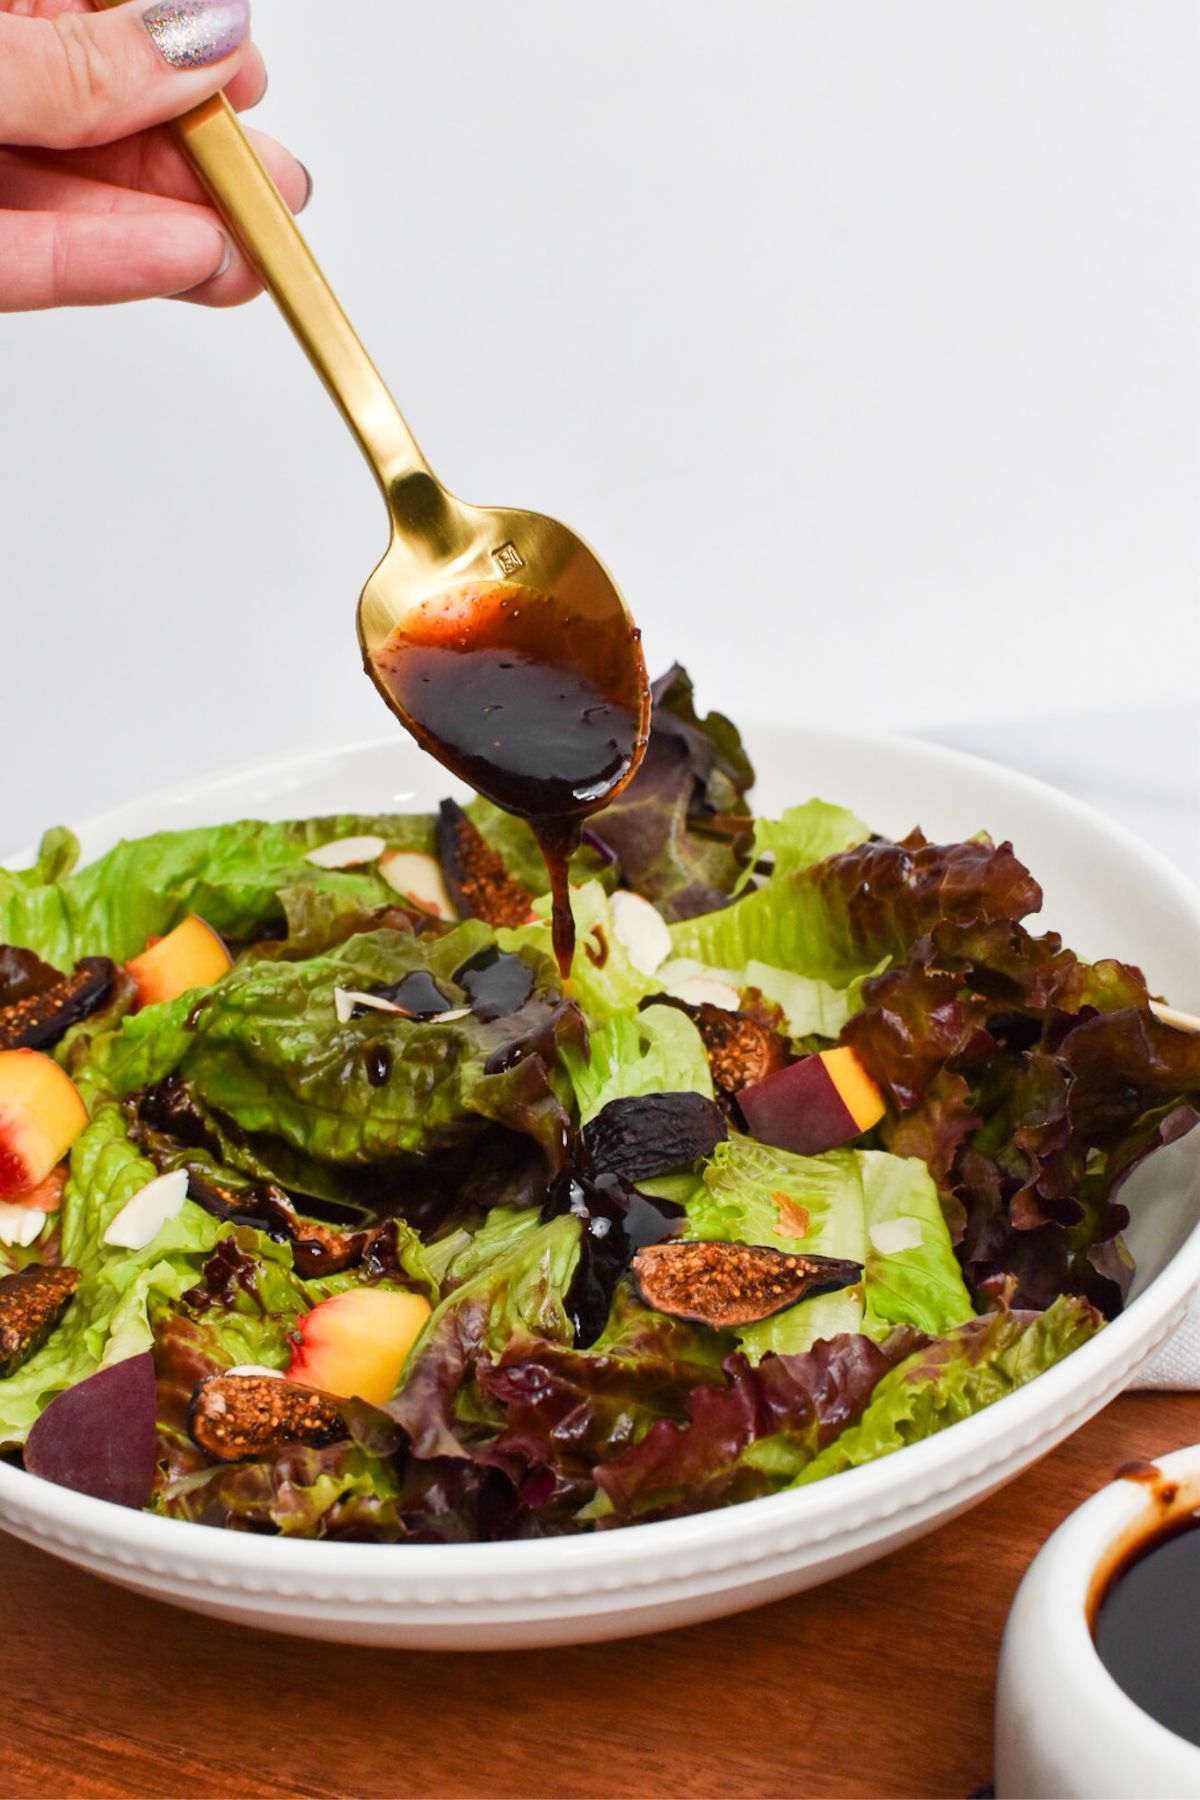 Thick fig glaze being drizzled from a gold spoon onto a salad.